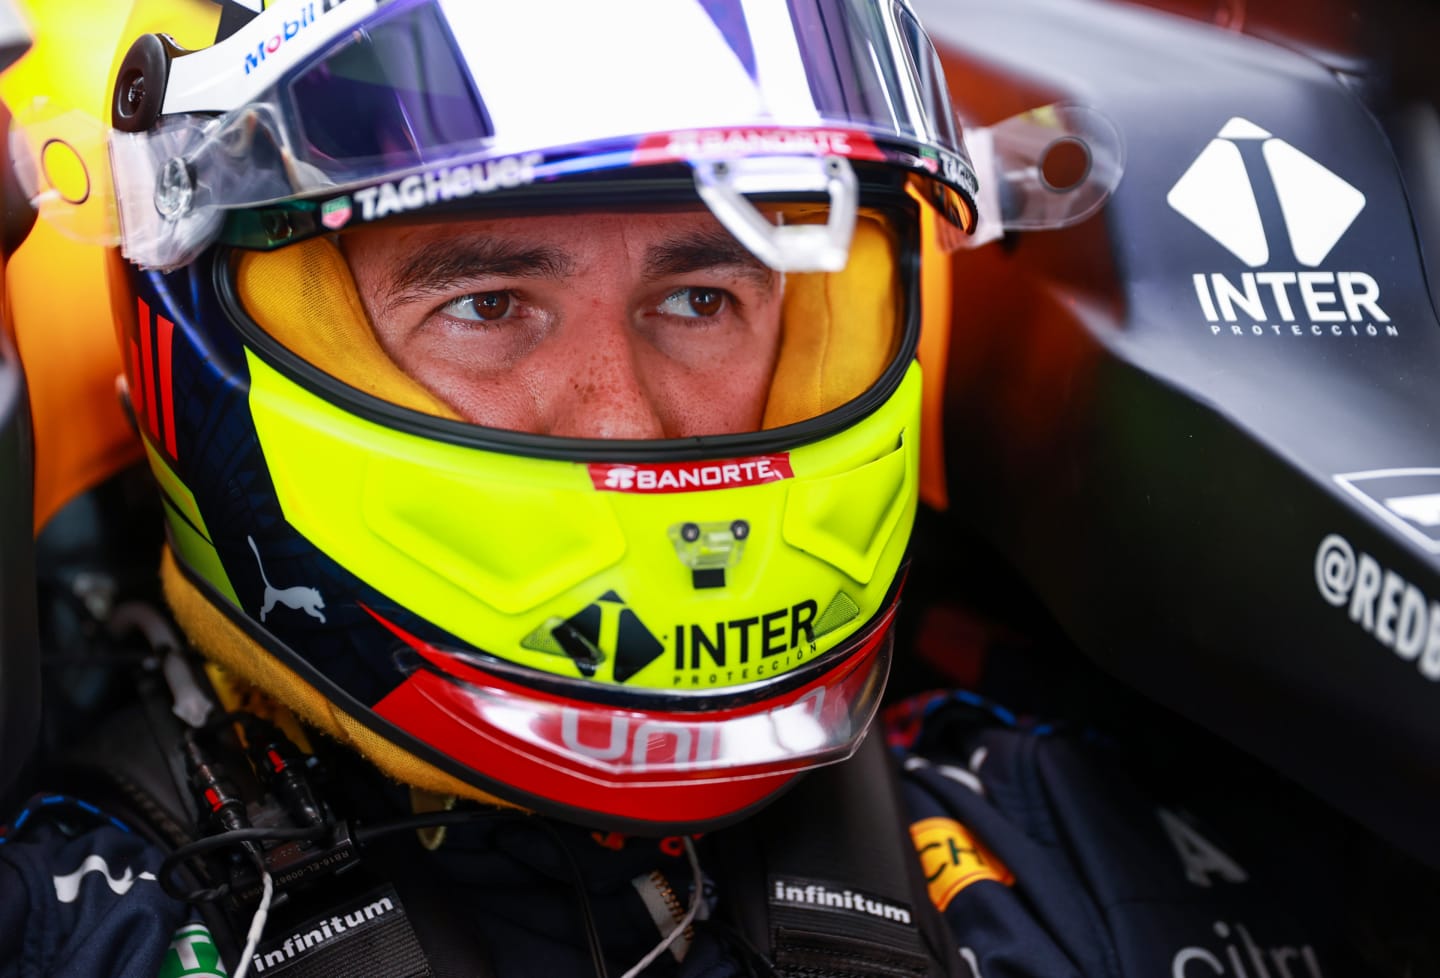 LE CASTELLET, FRANCE - JUNE 18: Sergio Perez of Mexico and Red Bull Racing prepares to drive in the garage during practice ahead of the F1 Grand Prix of France at Circuit Paul Ricard on June 18, 2021 in Le Castellet, France. (Photo by Mark Thompson/Getty Images)